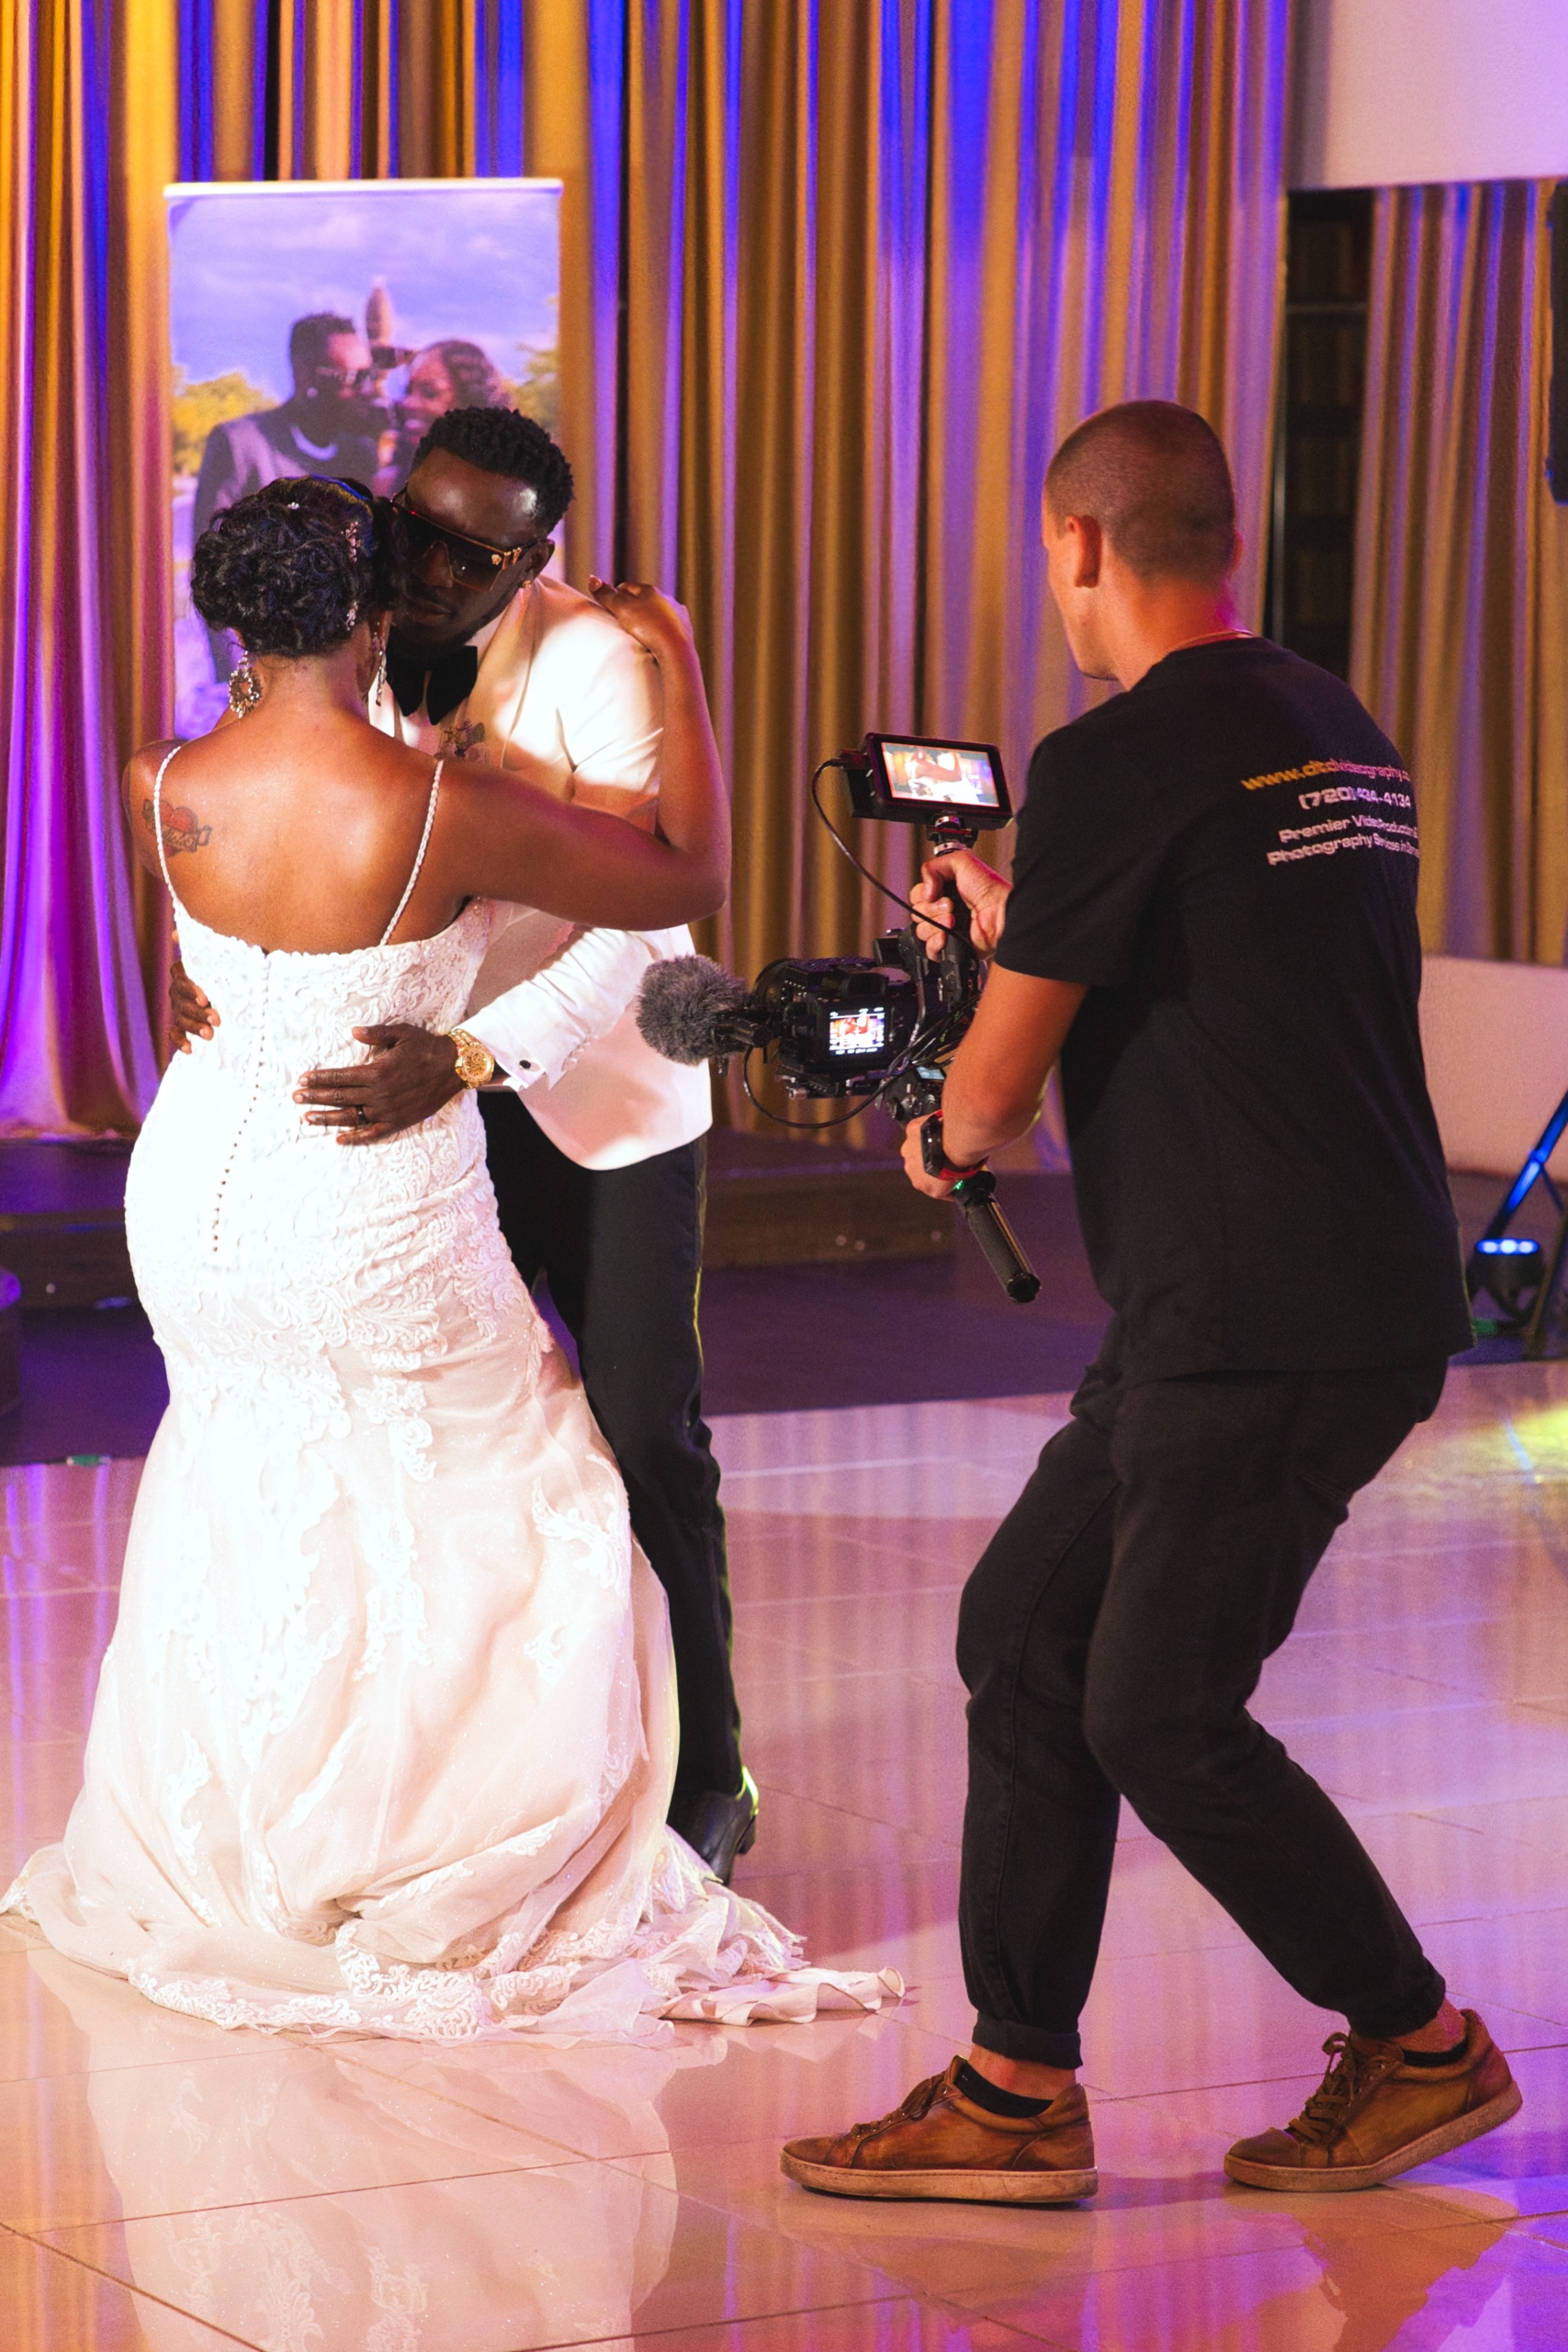 WEDDING VIDEOGRAPHY SERVICES